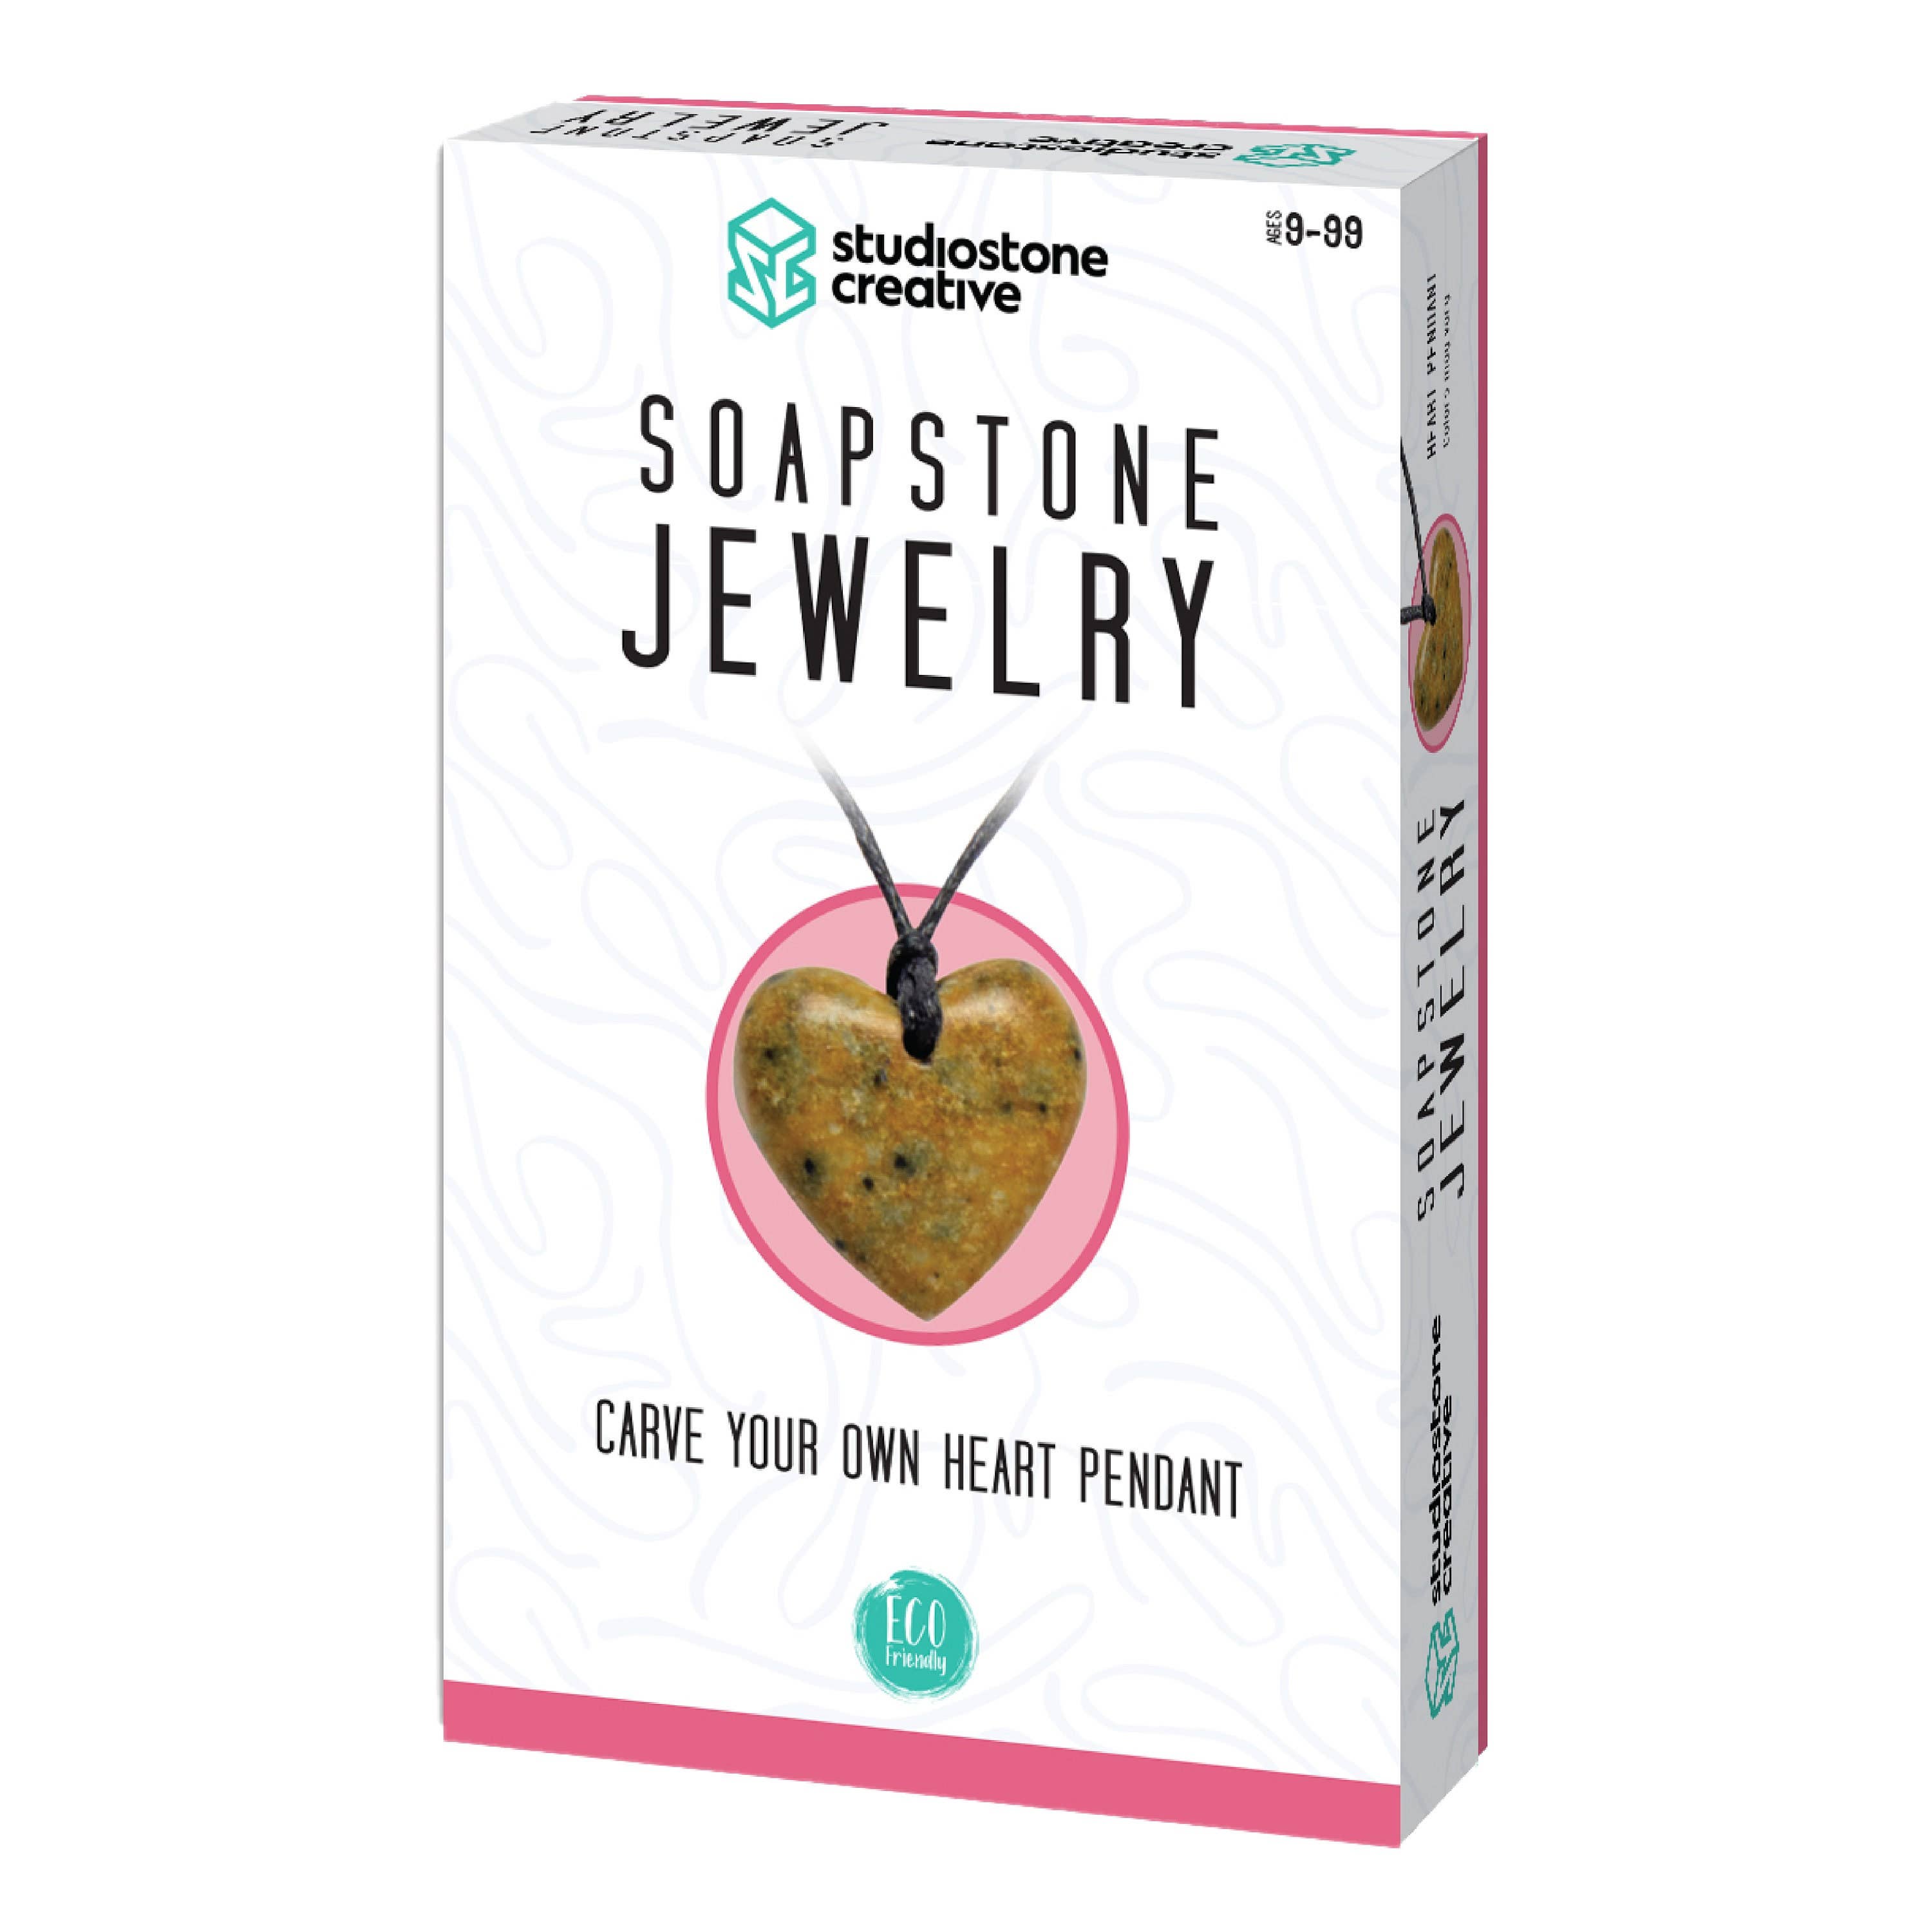 Studiostone Creative - NEW! Heart Soapstone Pendant Jewelry Kit Carving and Whittling - DIY Stone Necklace Arts and Craft Kit. For kids and adults 9 to 99+ Years.